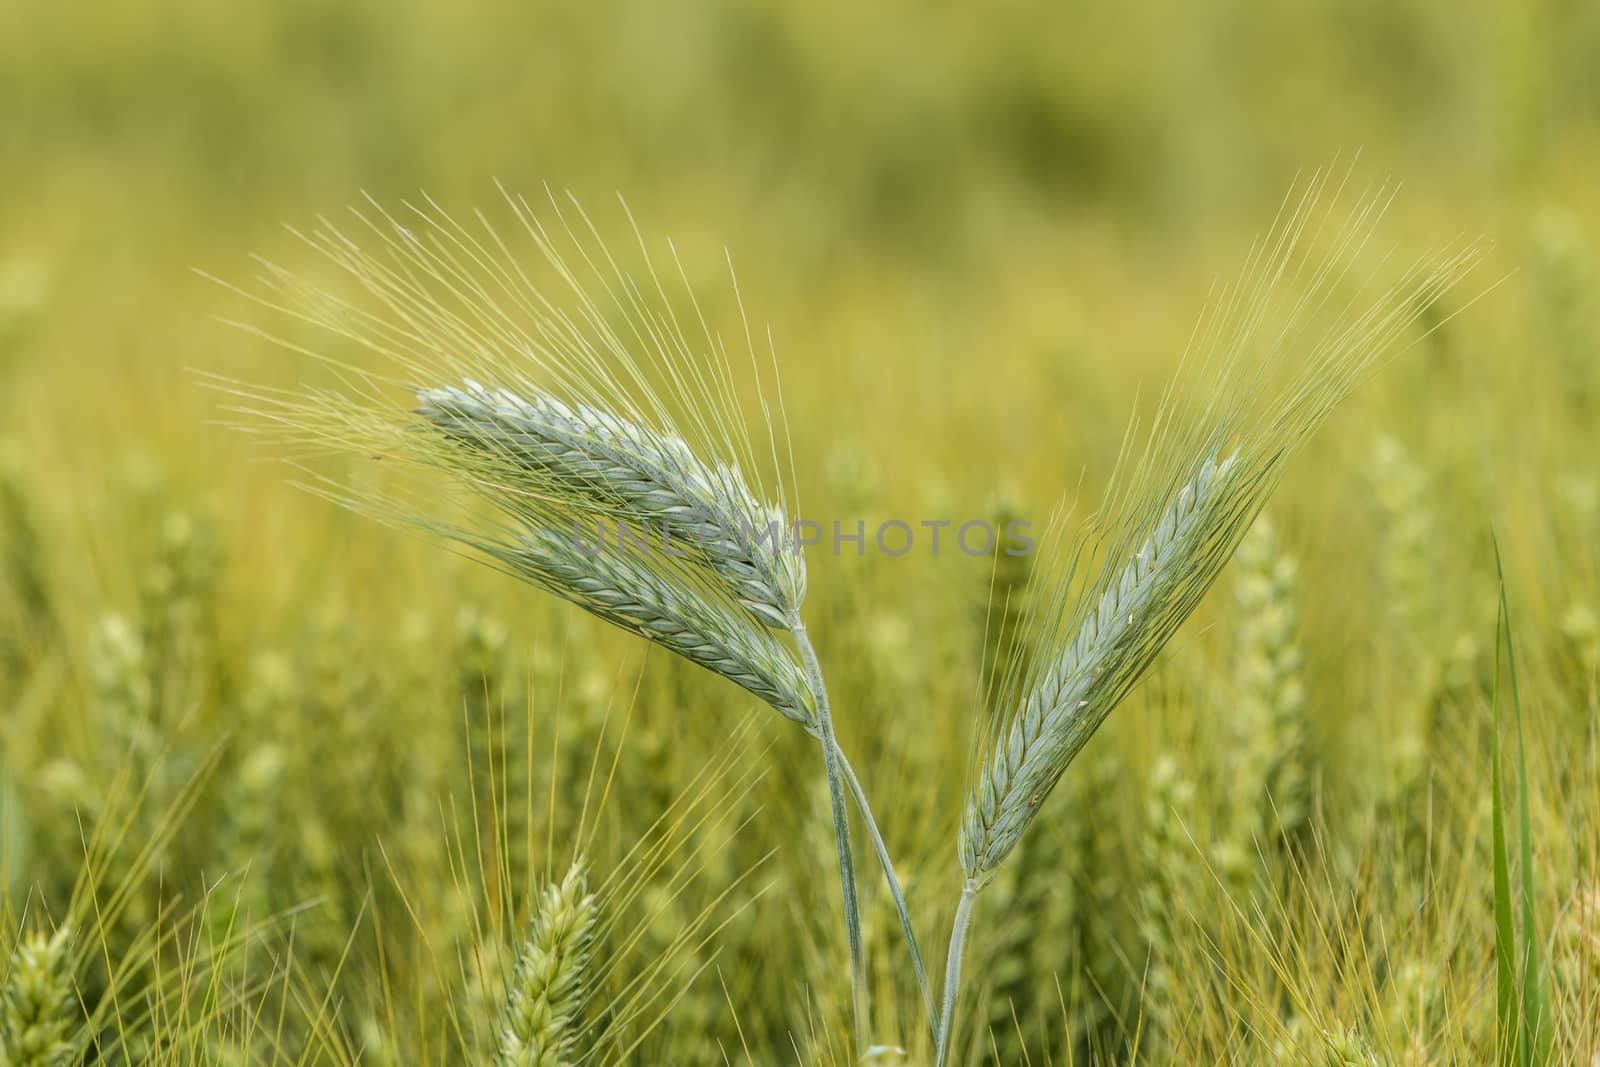 Barley in the field, closeup, selective focus on front stems